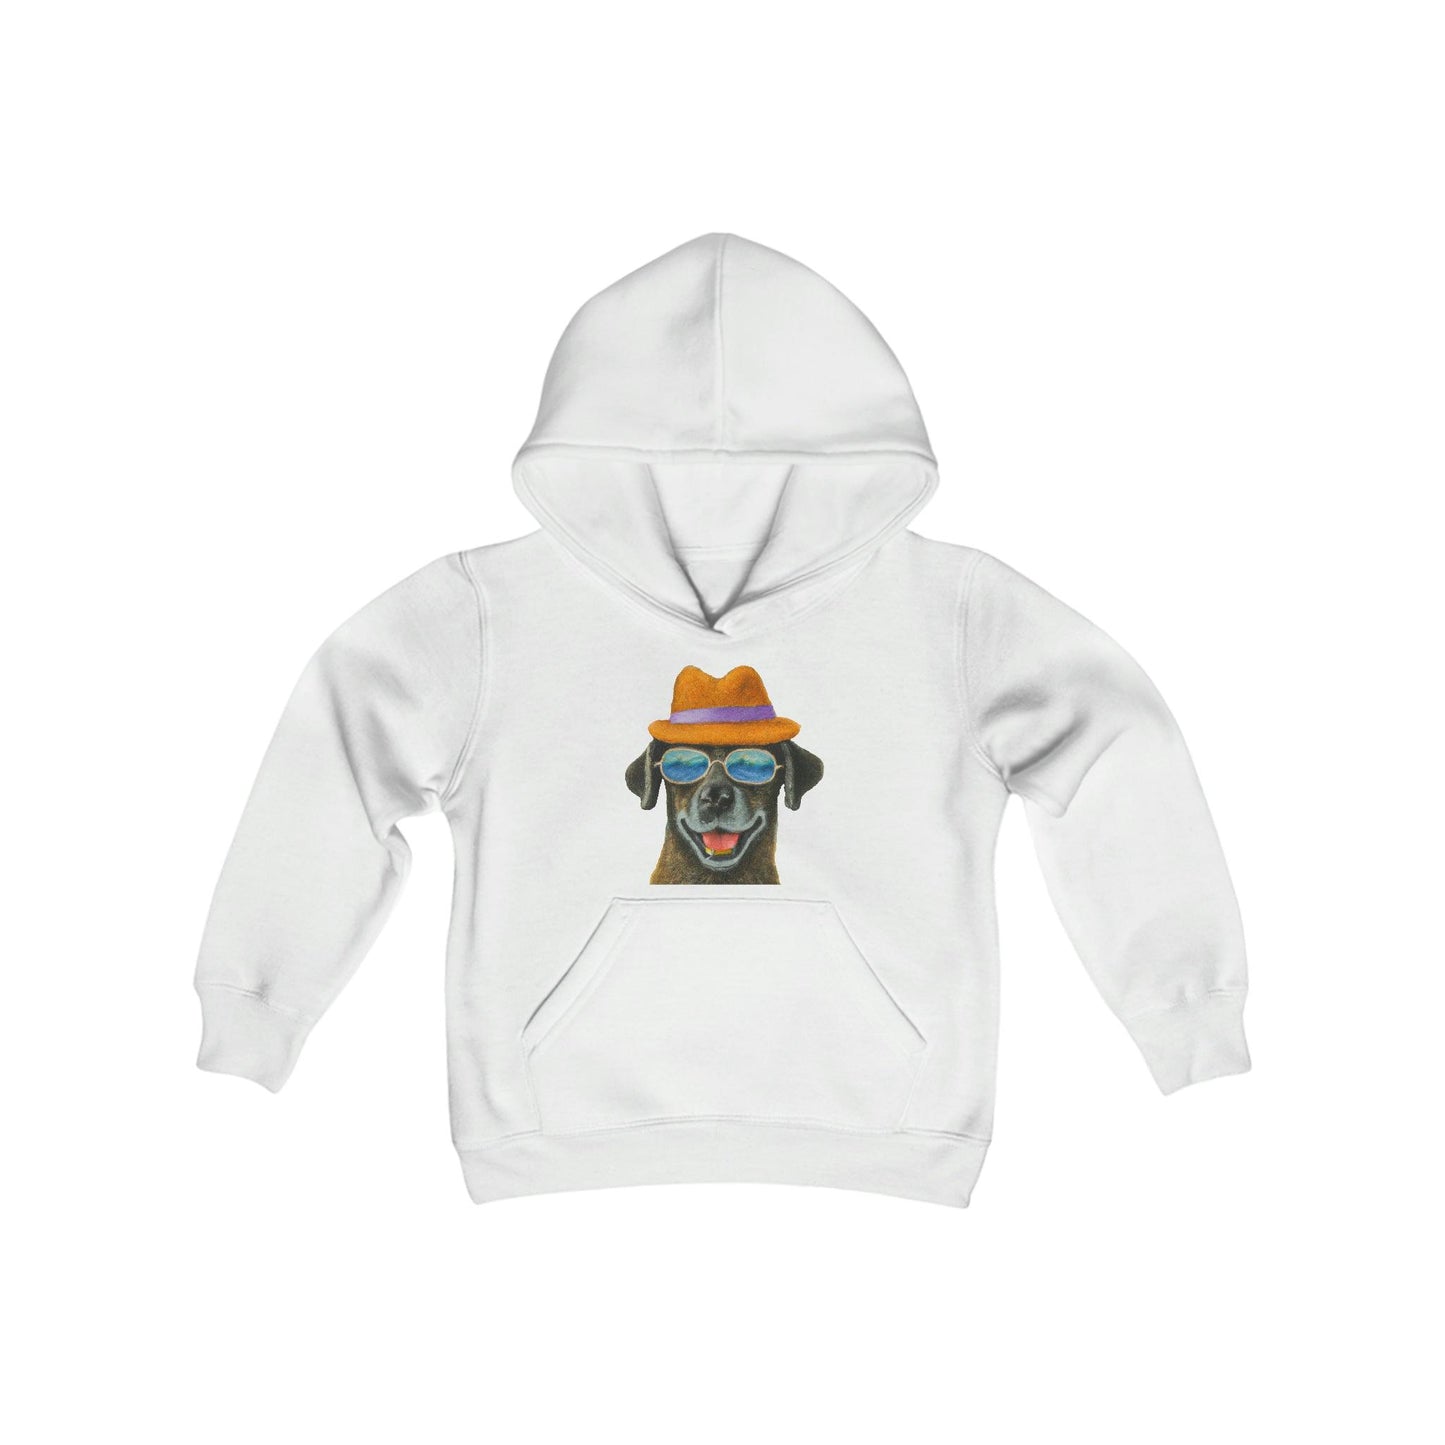 Dog at the beach wearing a hat and sunglasses painted art Youth Heavy Blend Hooded Sweatshirt